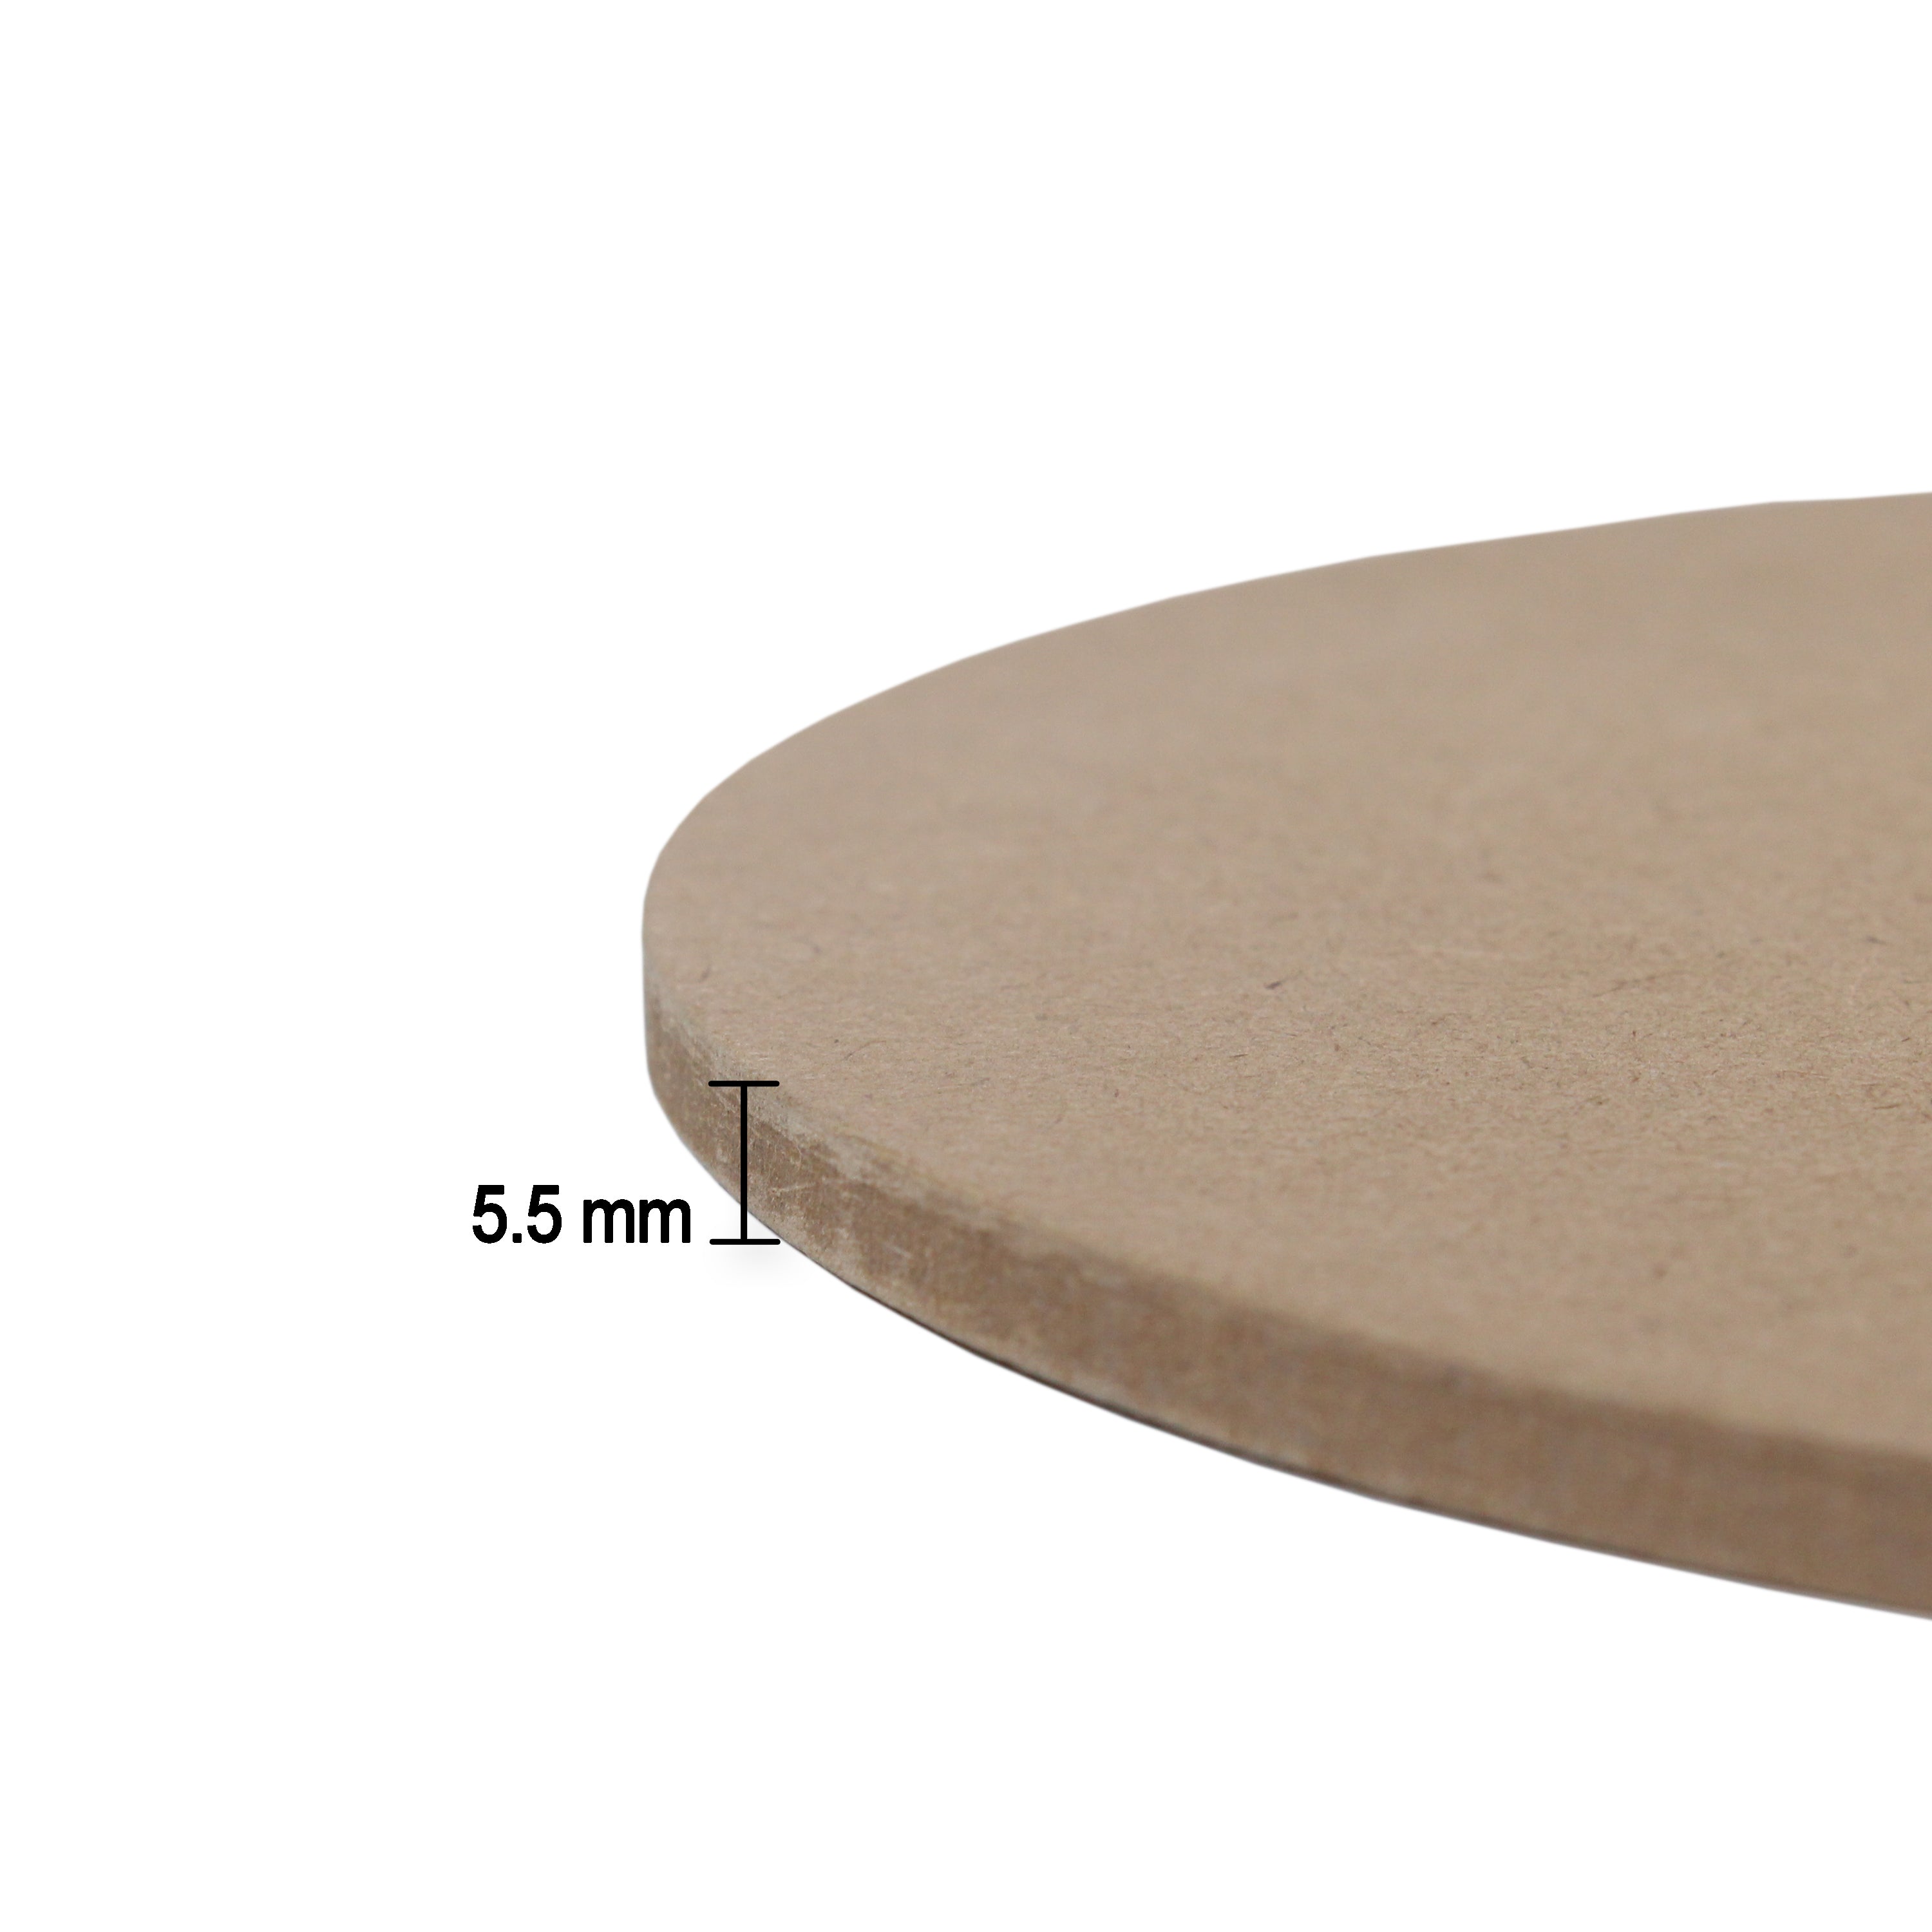 Mdf Clock Face 7Inch Dia 5.5Mm Thick 1Pc Lb